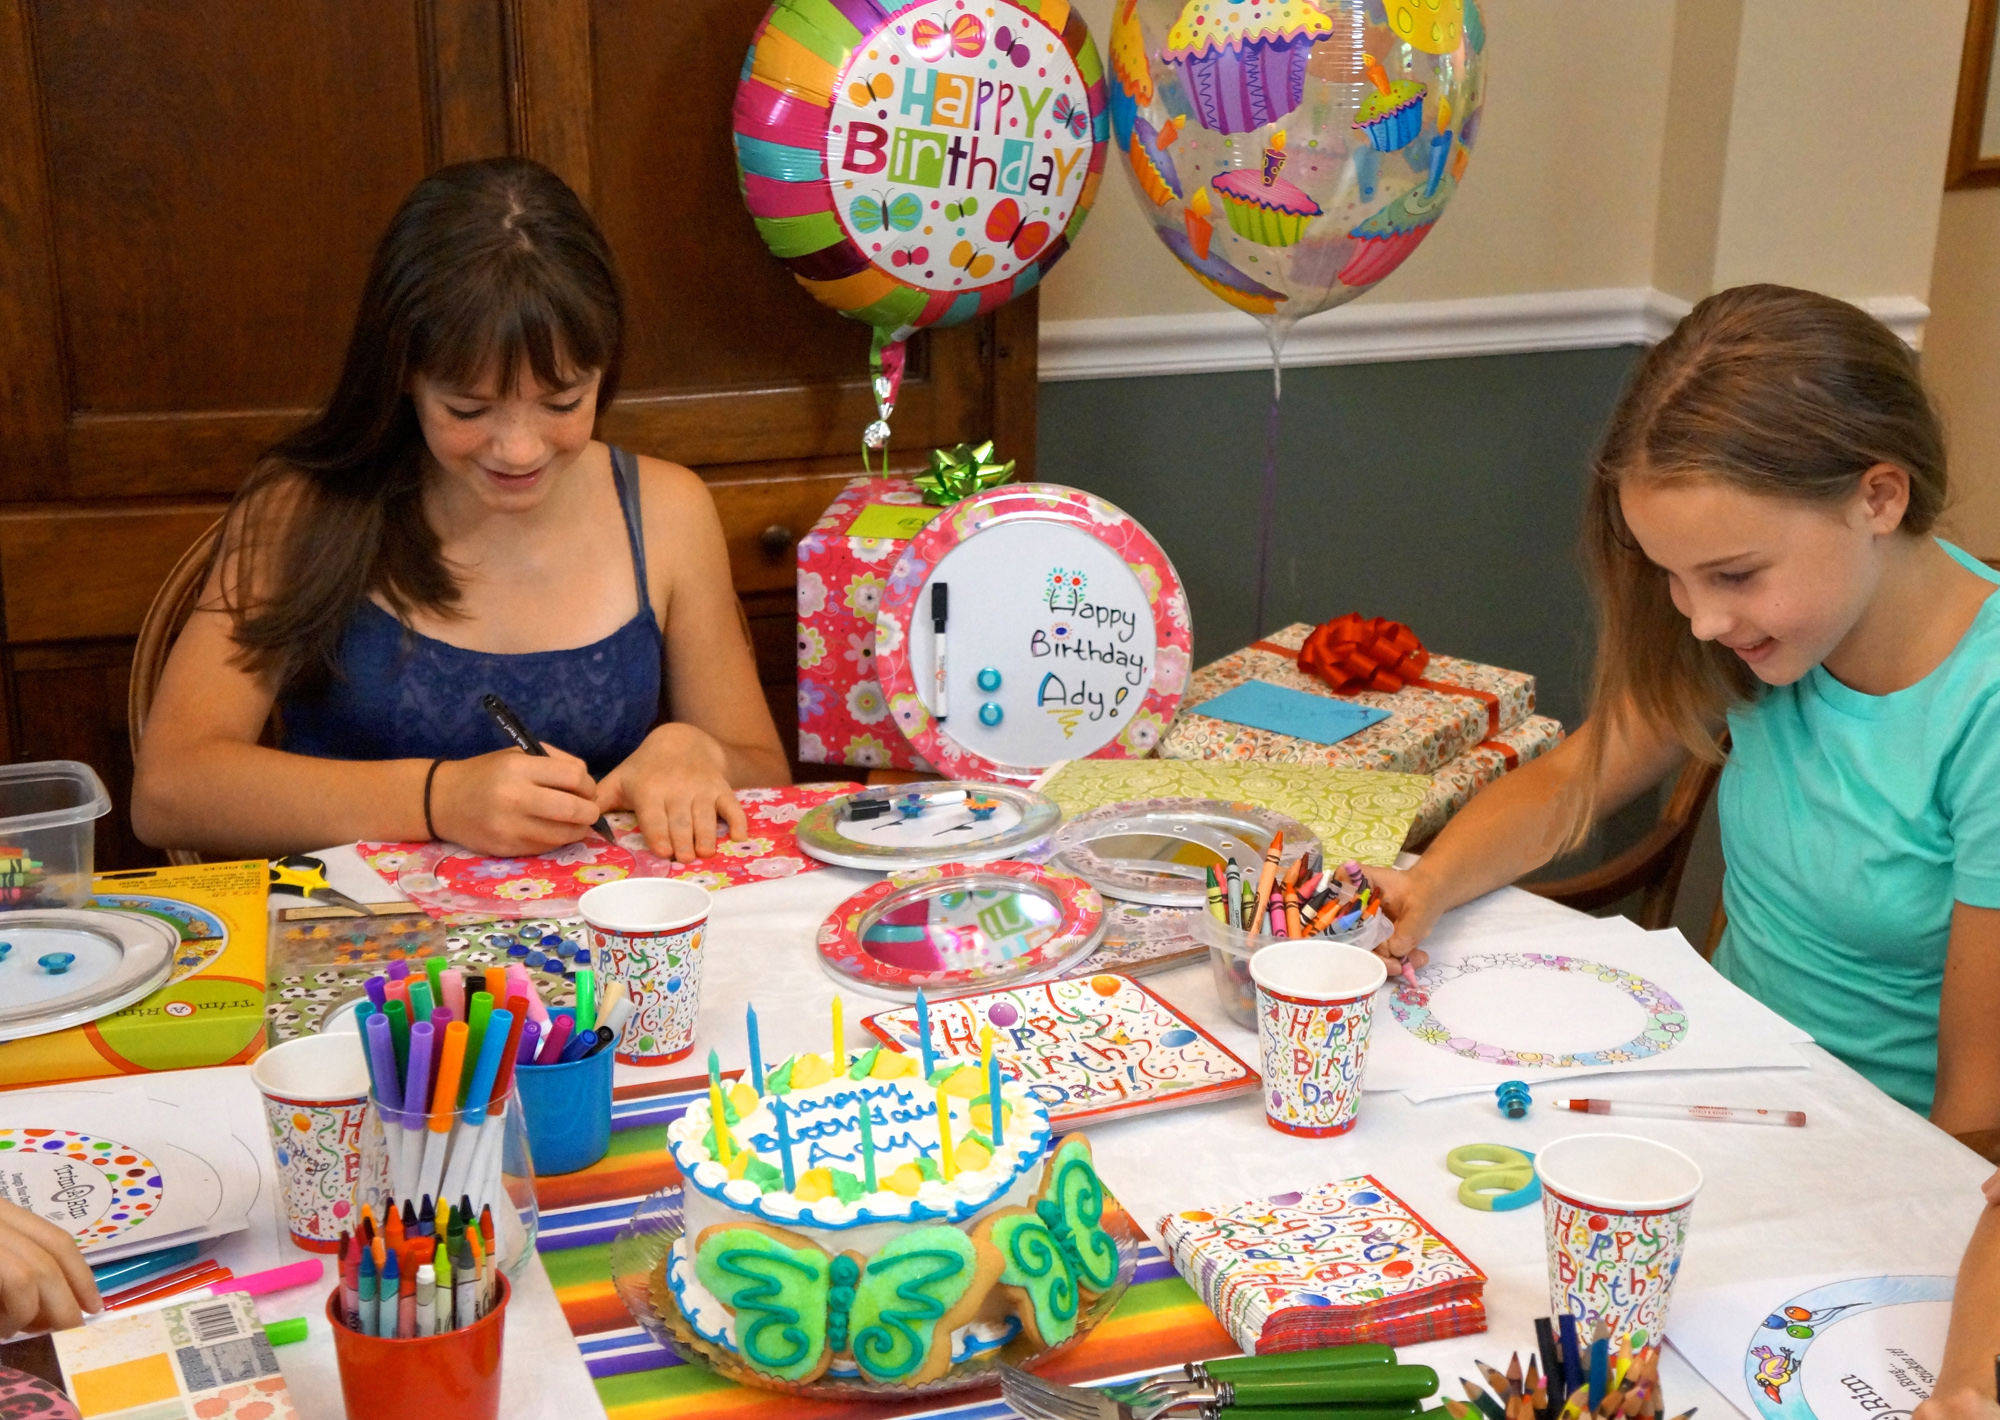 Trim-A-Rim now offers everything you need for creative Party Fun and a personalized favor!